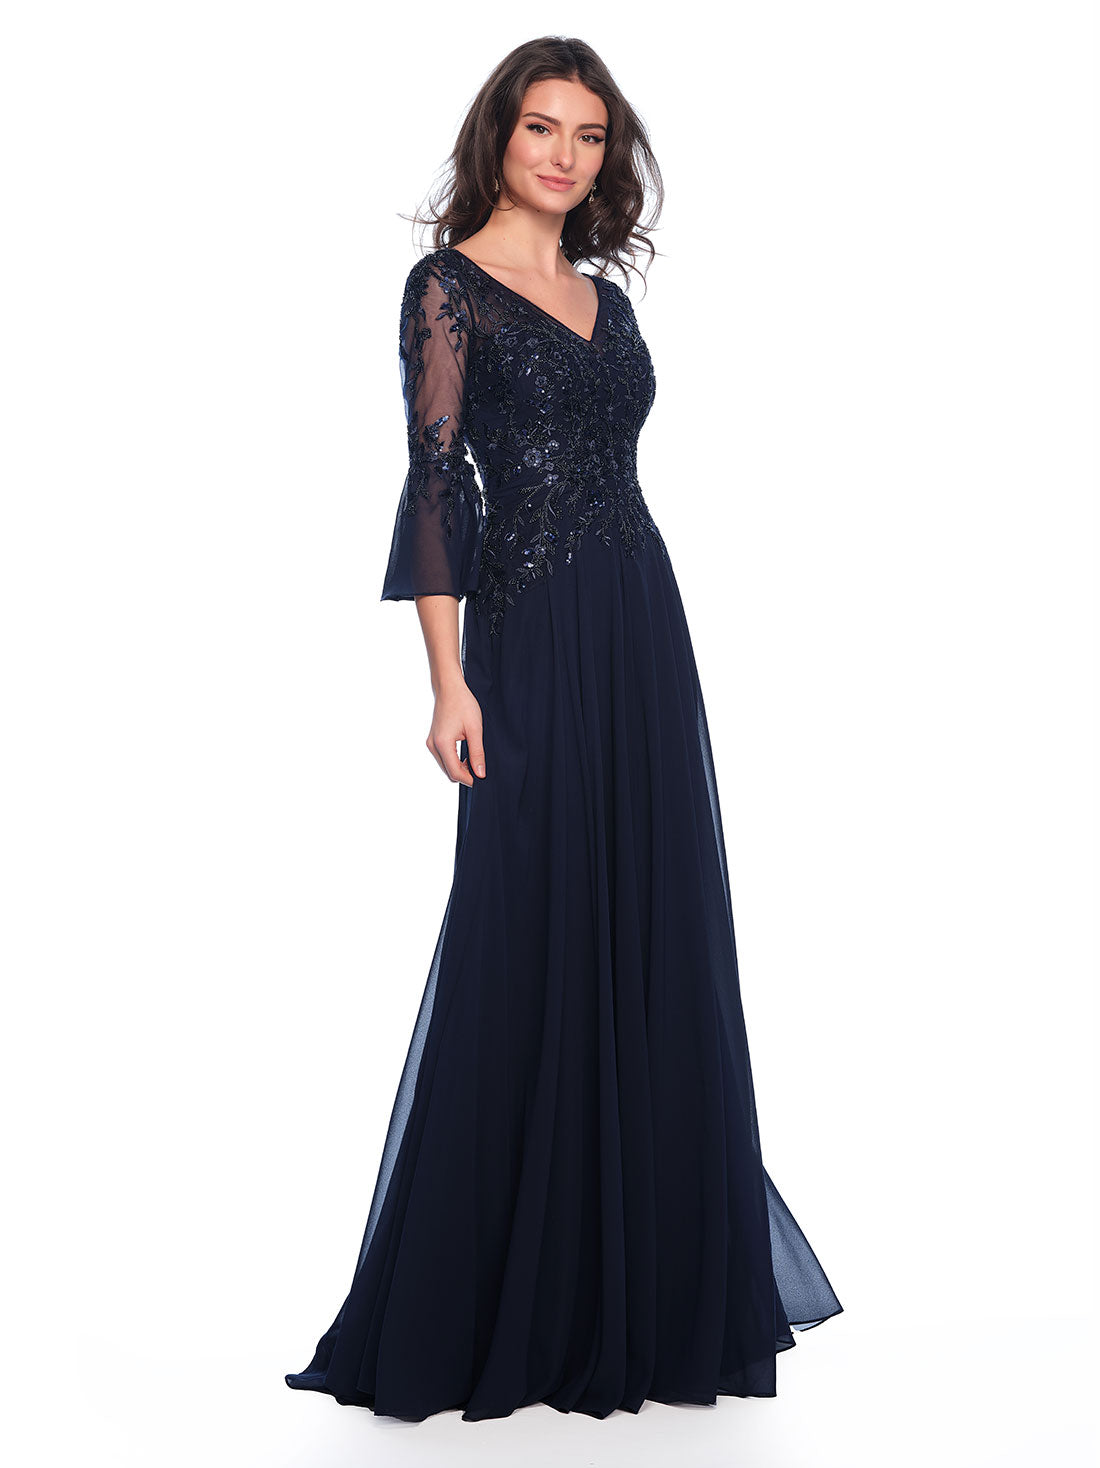 BELL SLEEVE FLOWY GOWN